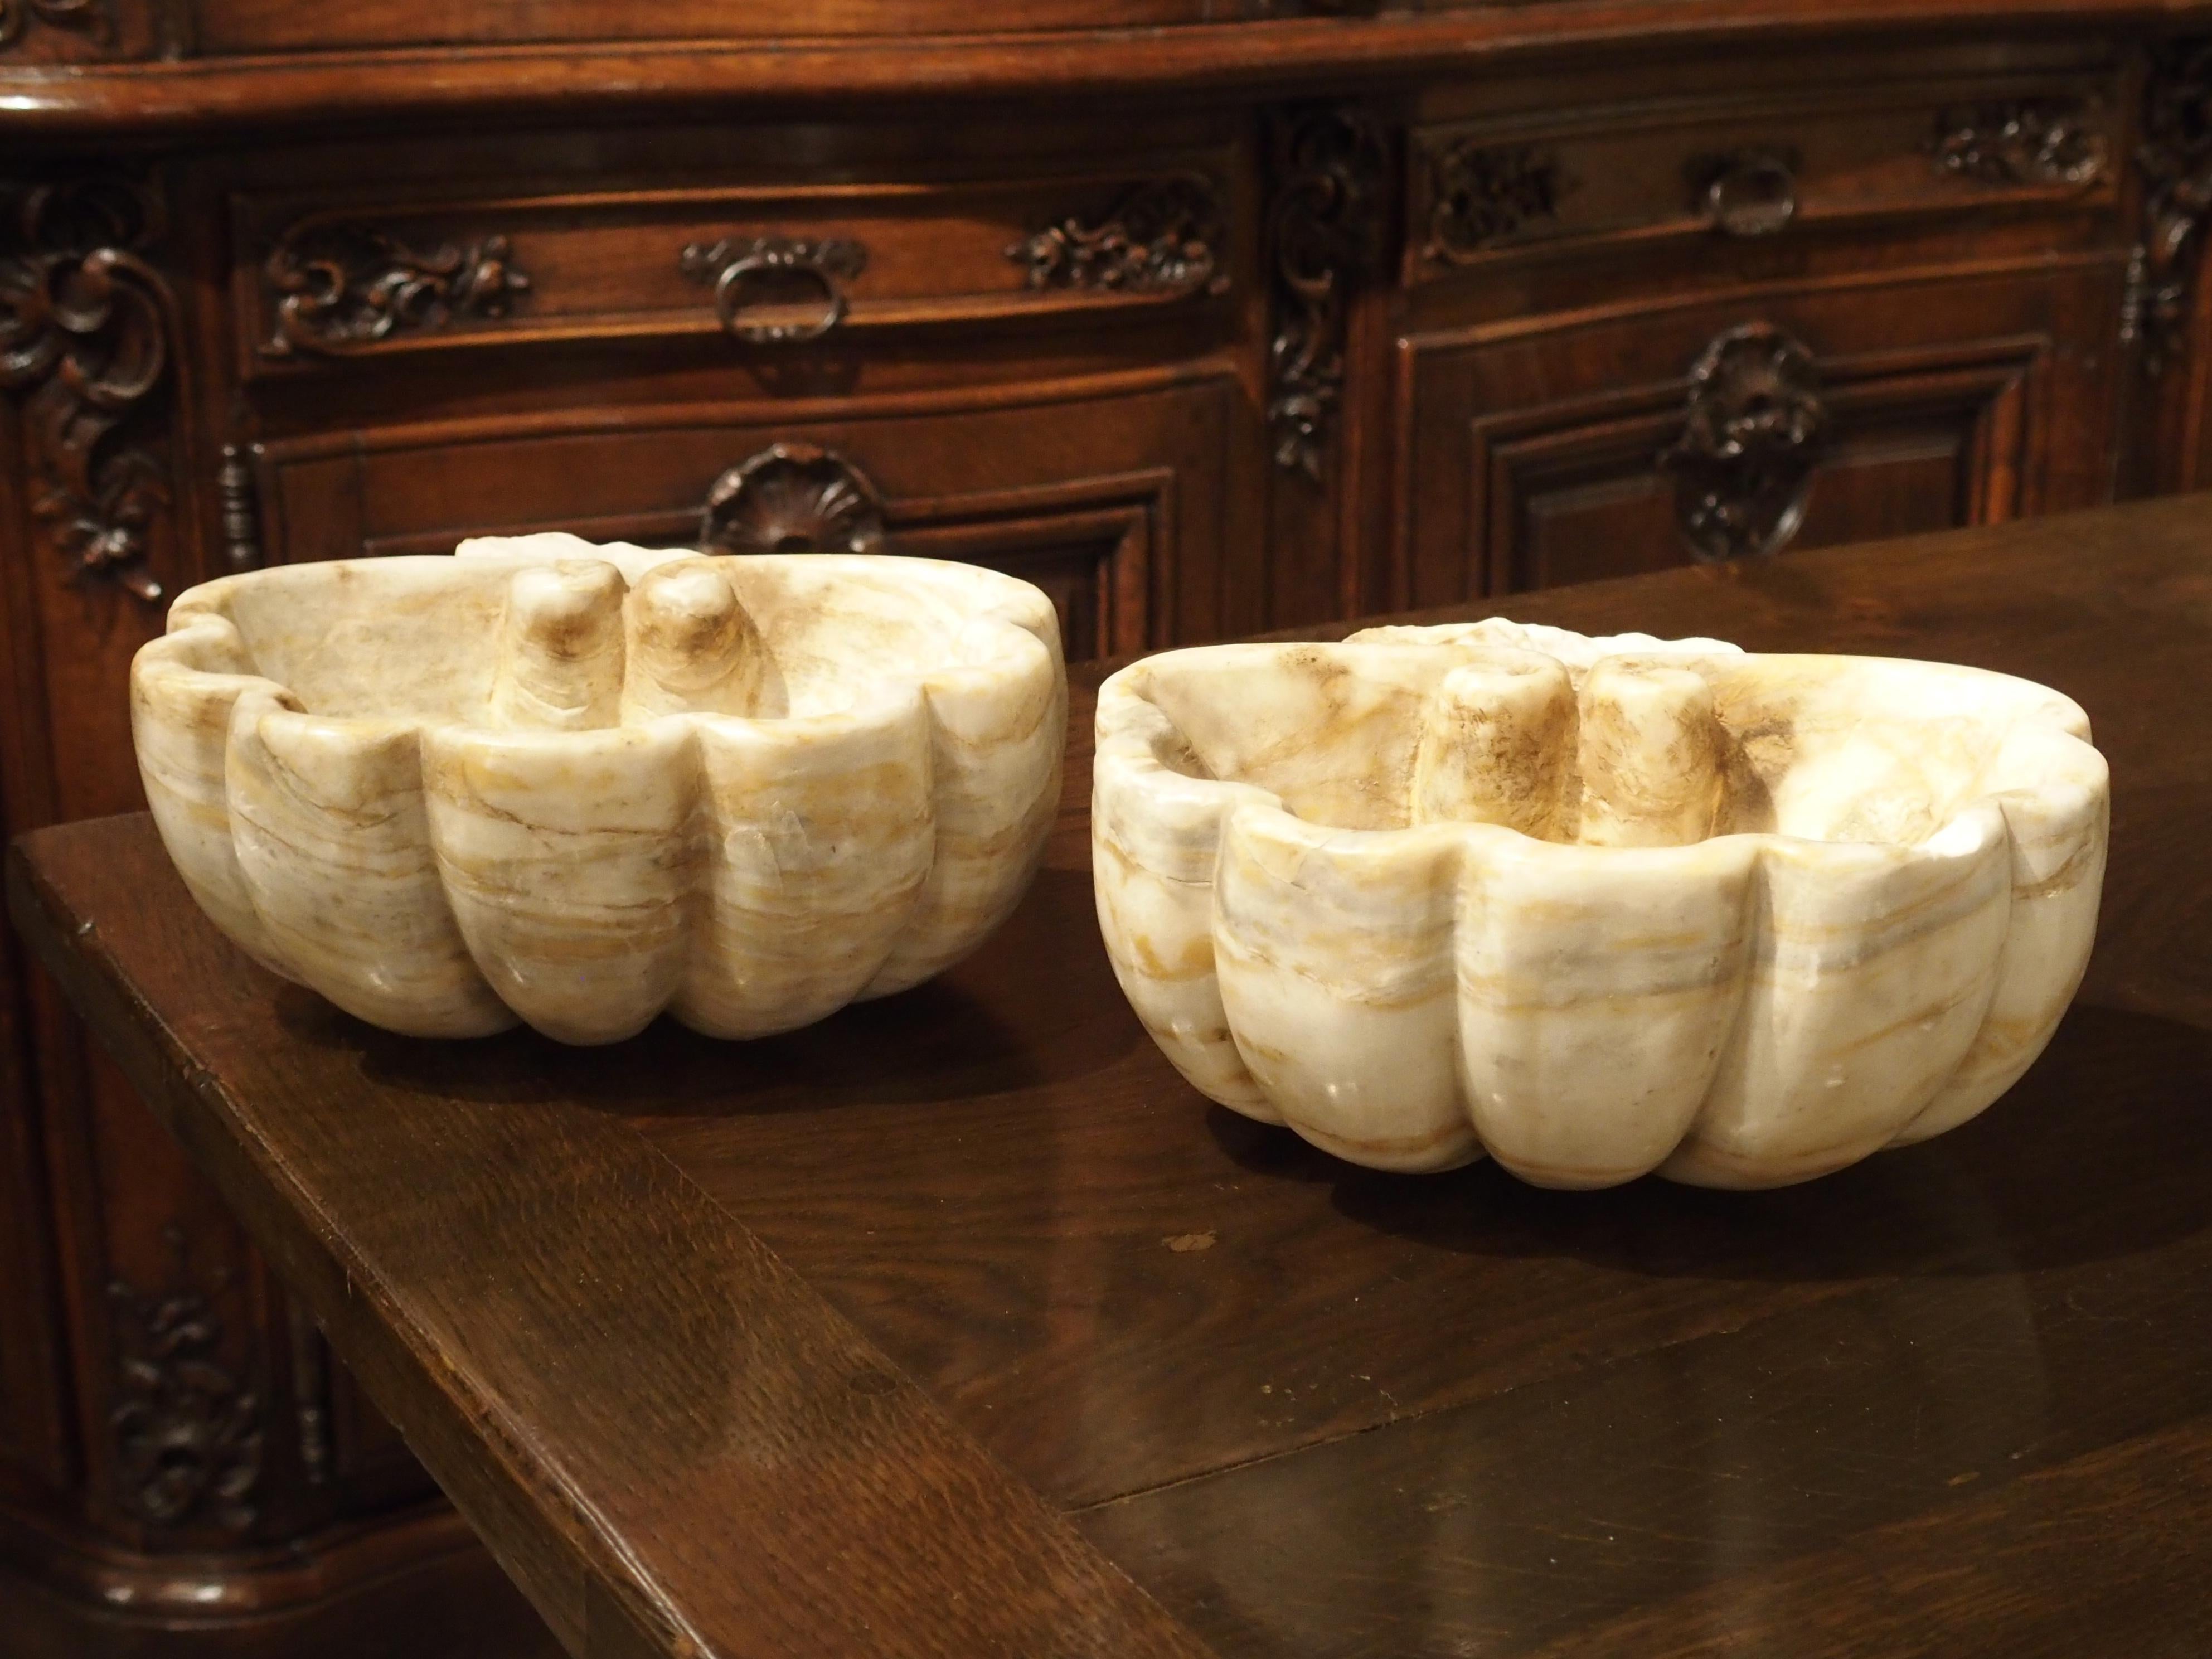 Small marble basins like these were probably originally used for holding holy water in Catholic Churches. They are in the shape of stylized shells with gadrooned lobes. You can see where the backs are rough cut, as if removed from the wall. Today